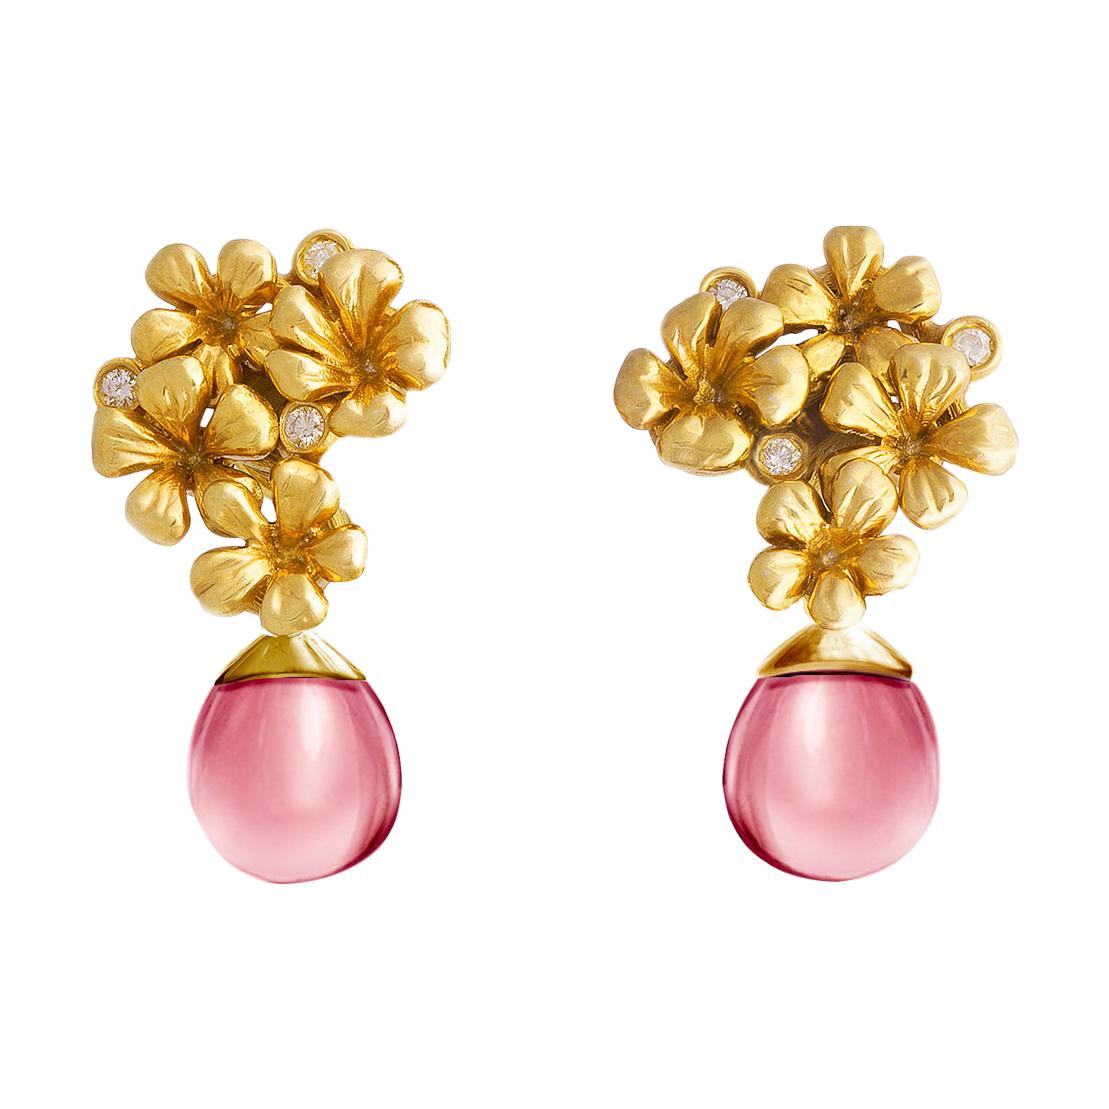 Yellow Gold Contemporary Clip-On Earrings with 6 Round Diamonds and Pink Quartz For Sale 9